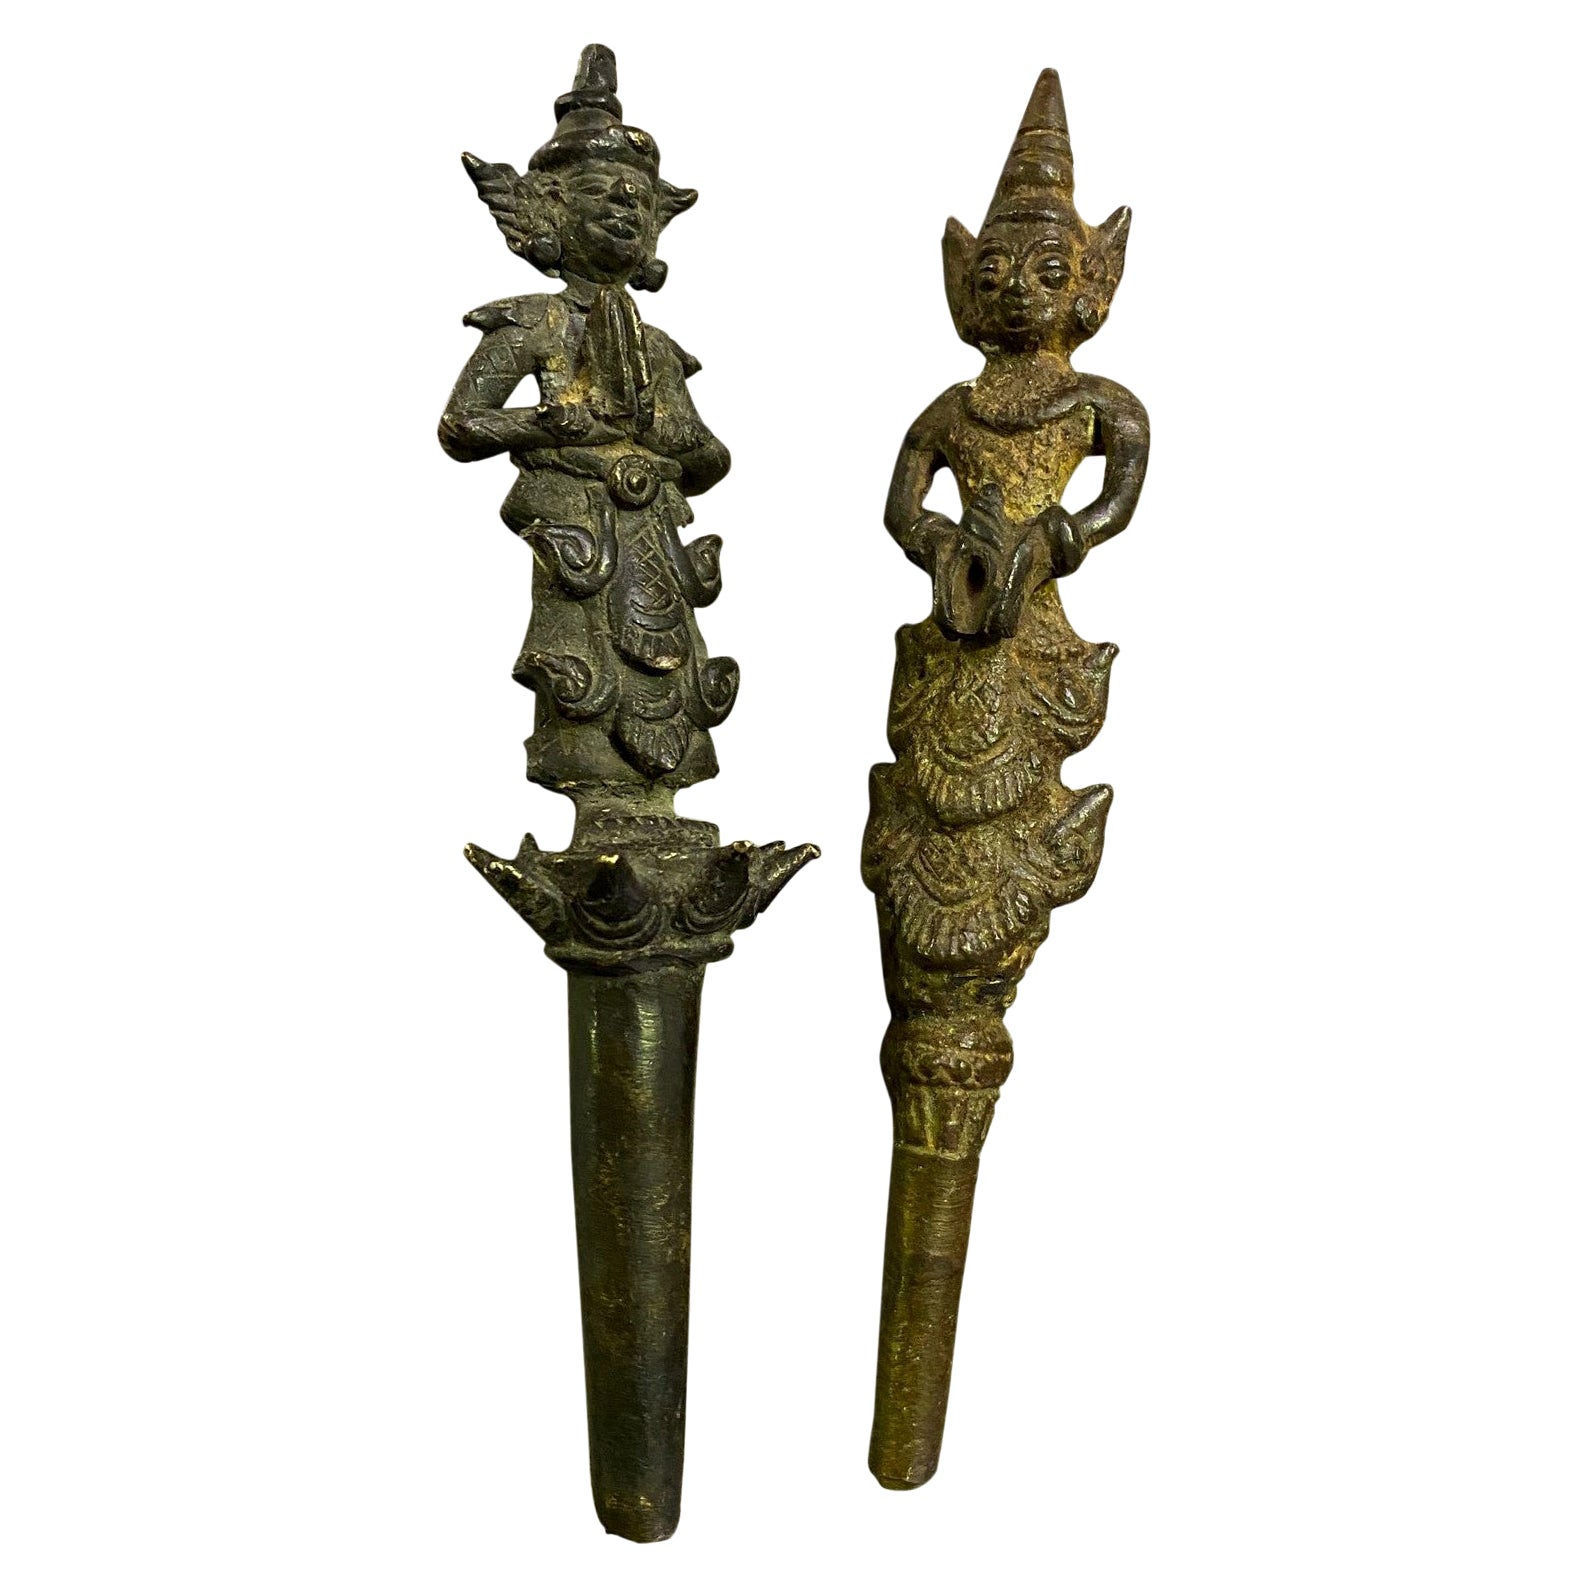 Pair of Tibetan or Nepalese Bronze Amulets Temple Shrine Figures Artifacts